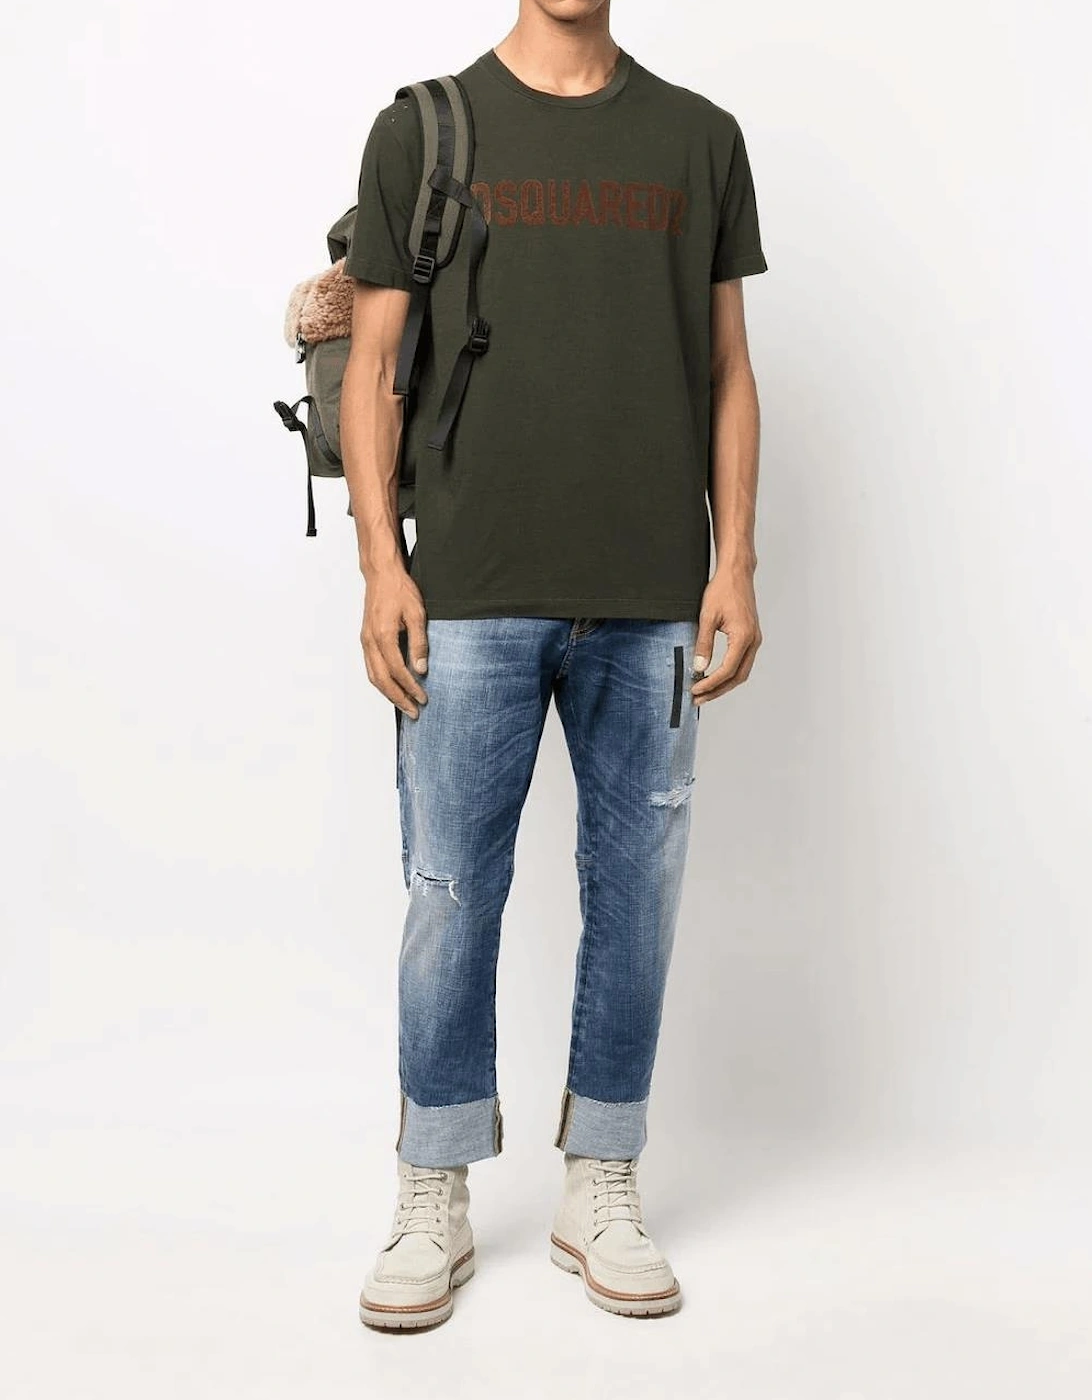 Cool Fit Branded T-Shirt